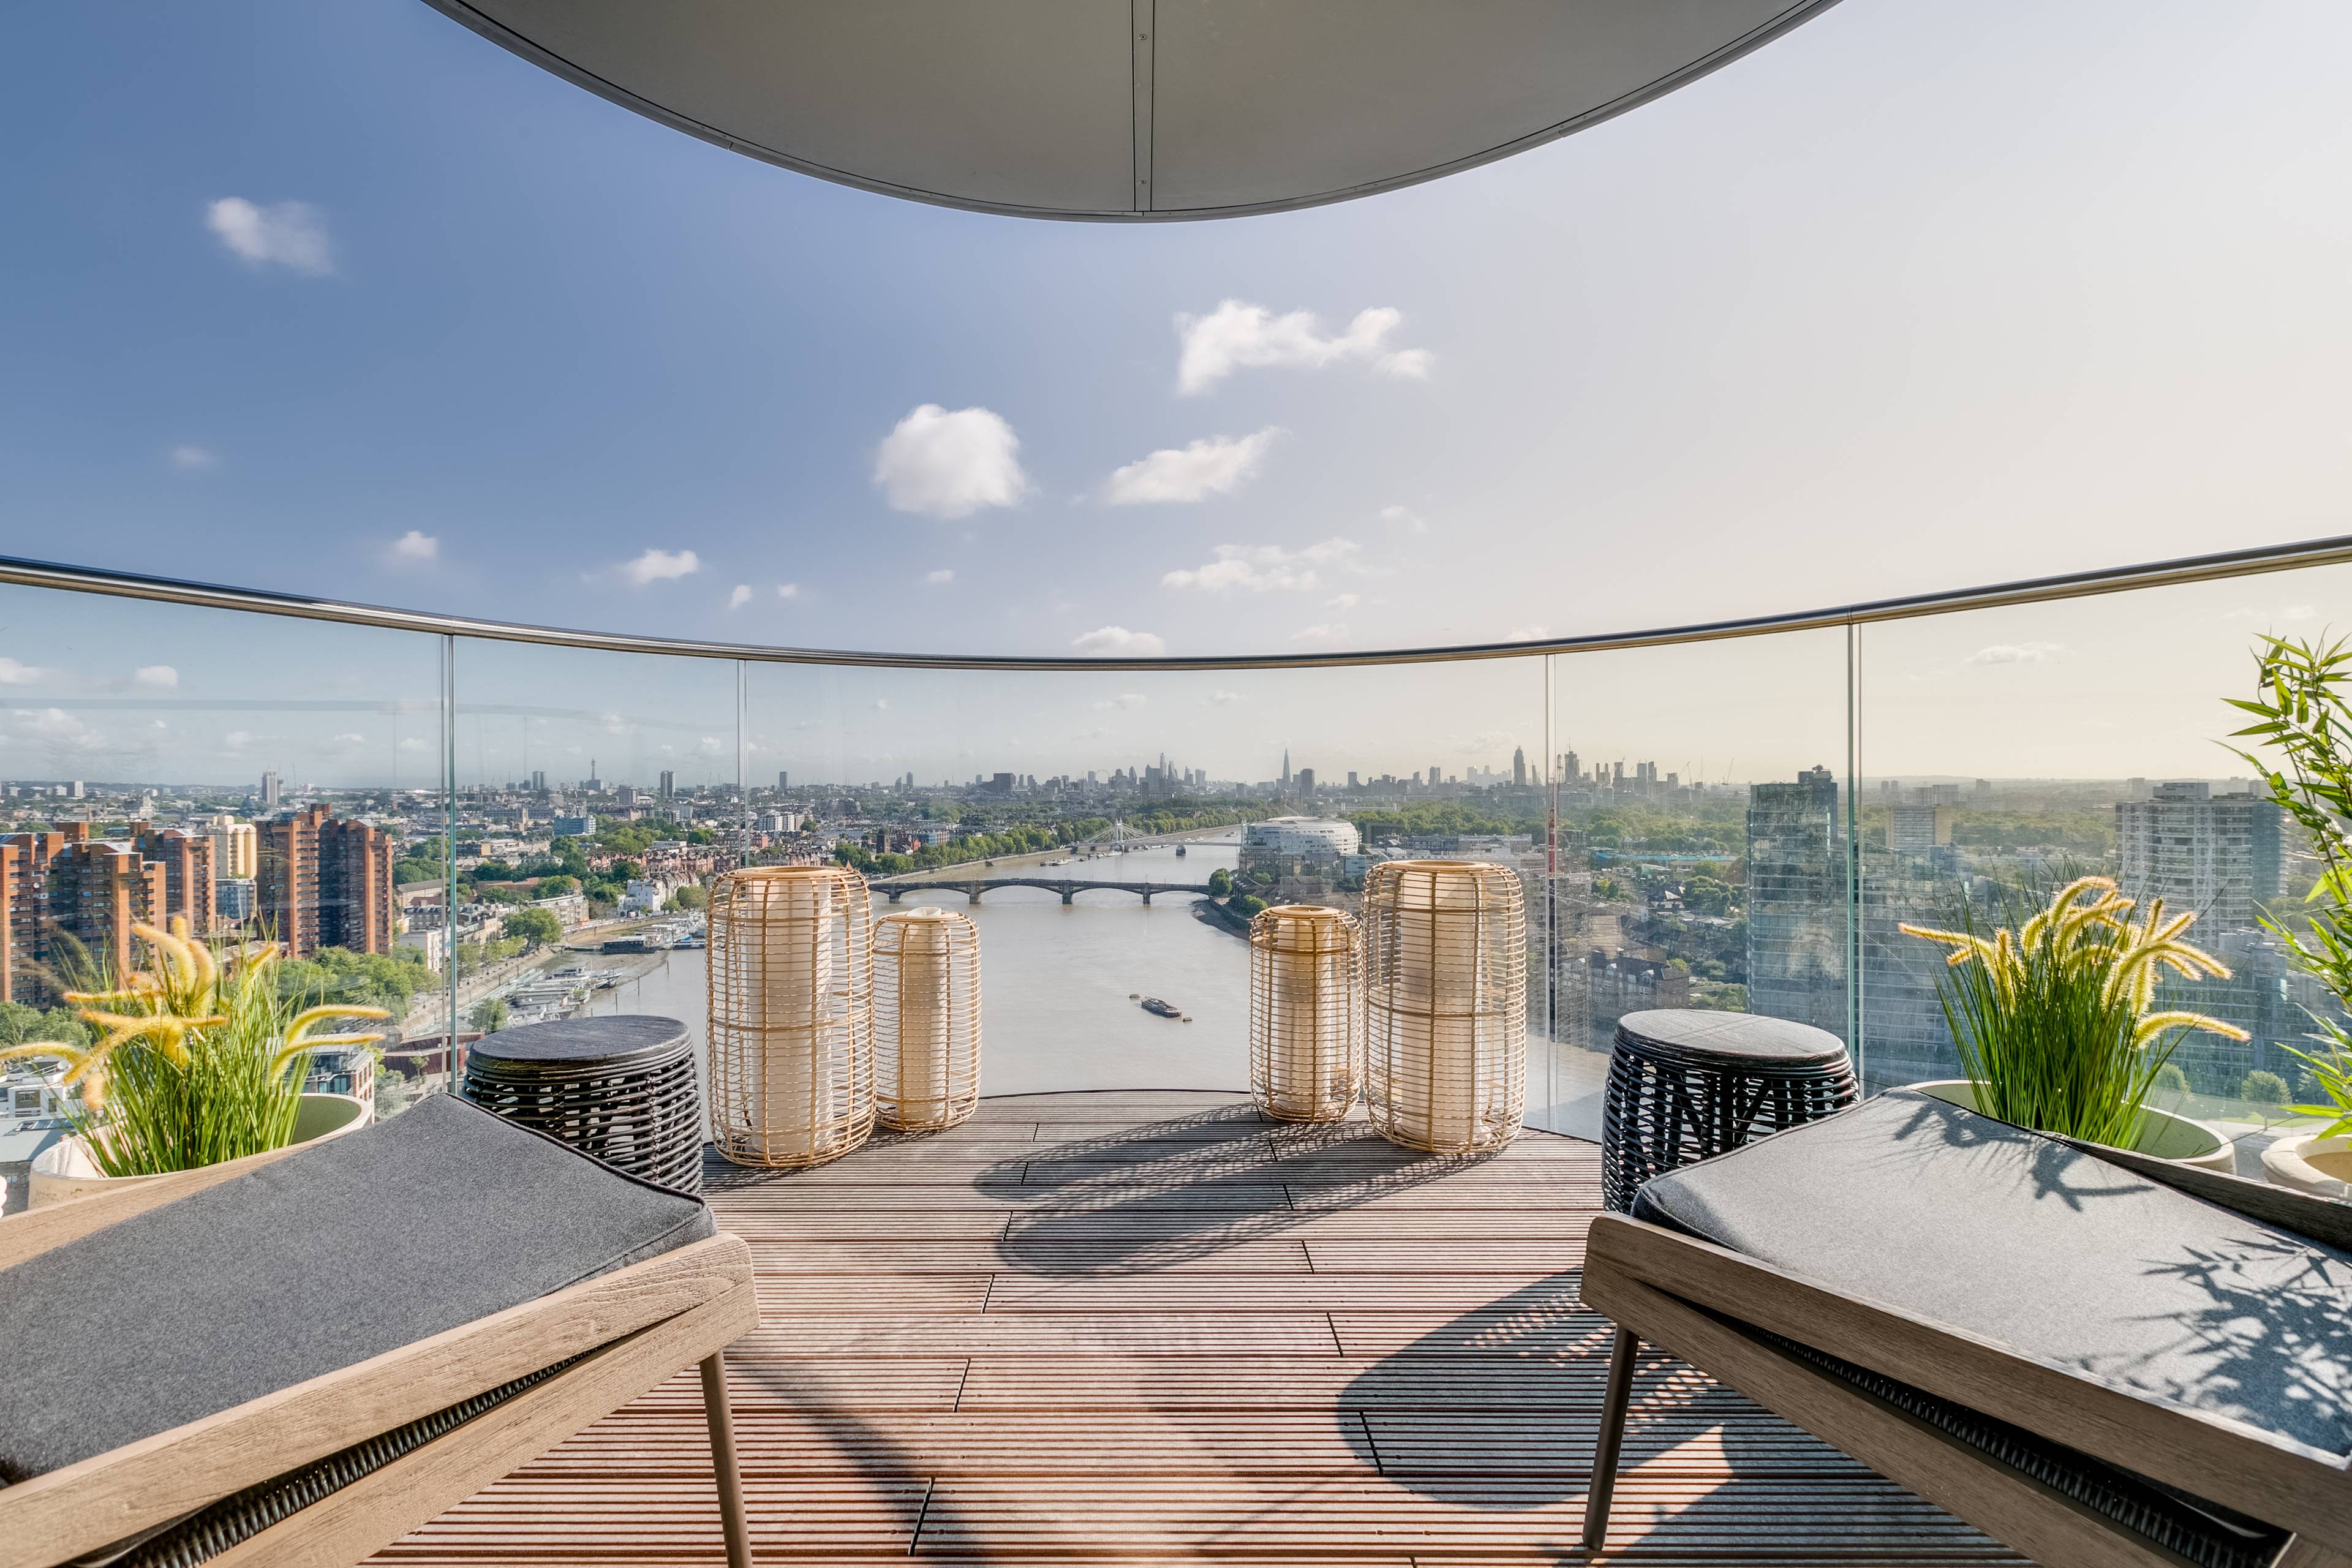 4 Bedroom Luxury Apartment With Amazing Views - Located in the heart of Chelsea Harbour, this stunning 4 bedroom, 4.5 bathroom, high spec apartment awaits you